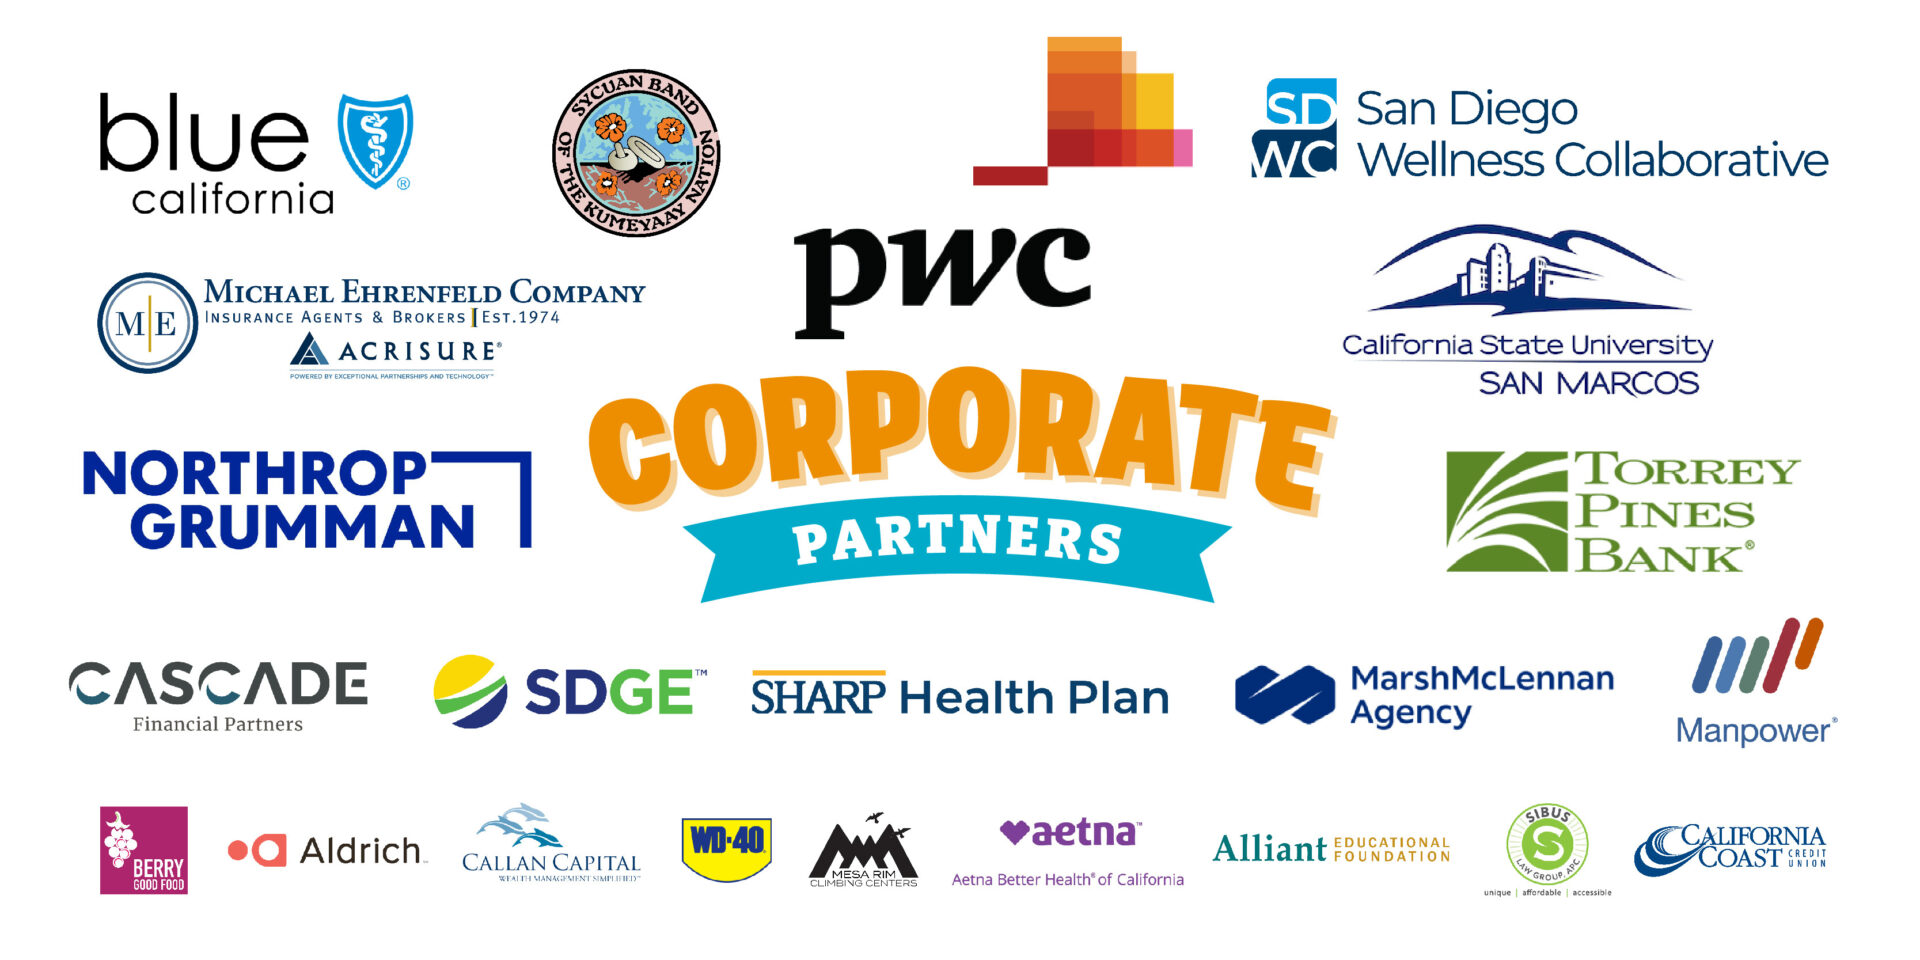 A collage of corporate logos featuring companies like PWC, Northrop Grumman, Torrey Pines Bank, and Aetna, with a central header titled "Corporate Partnership in San Diego.